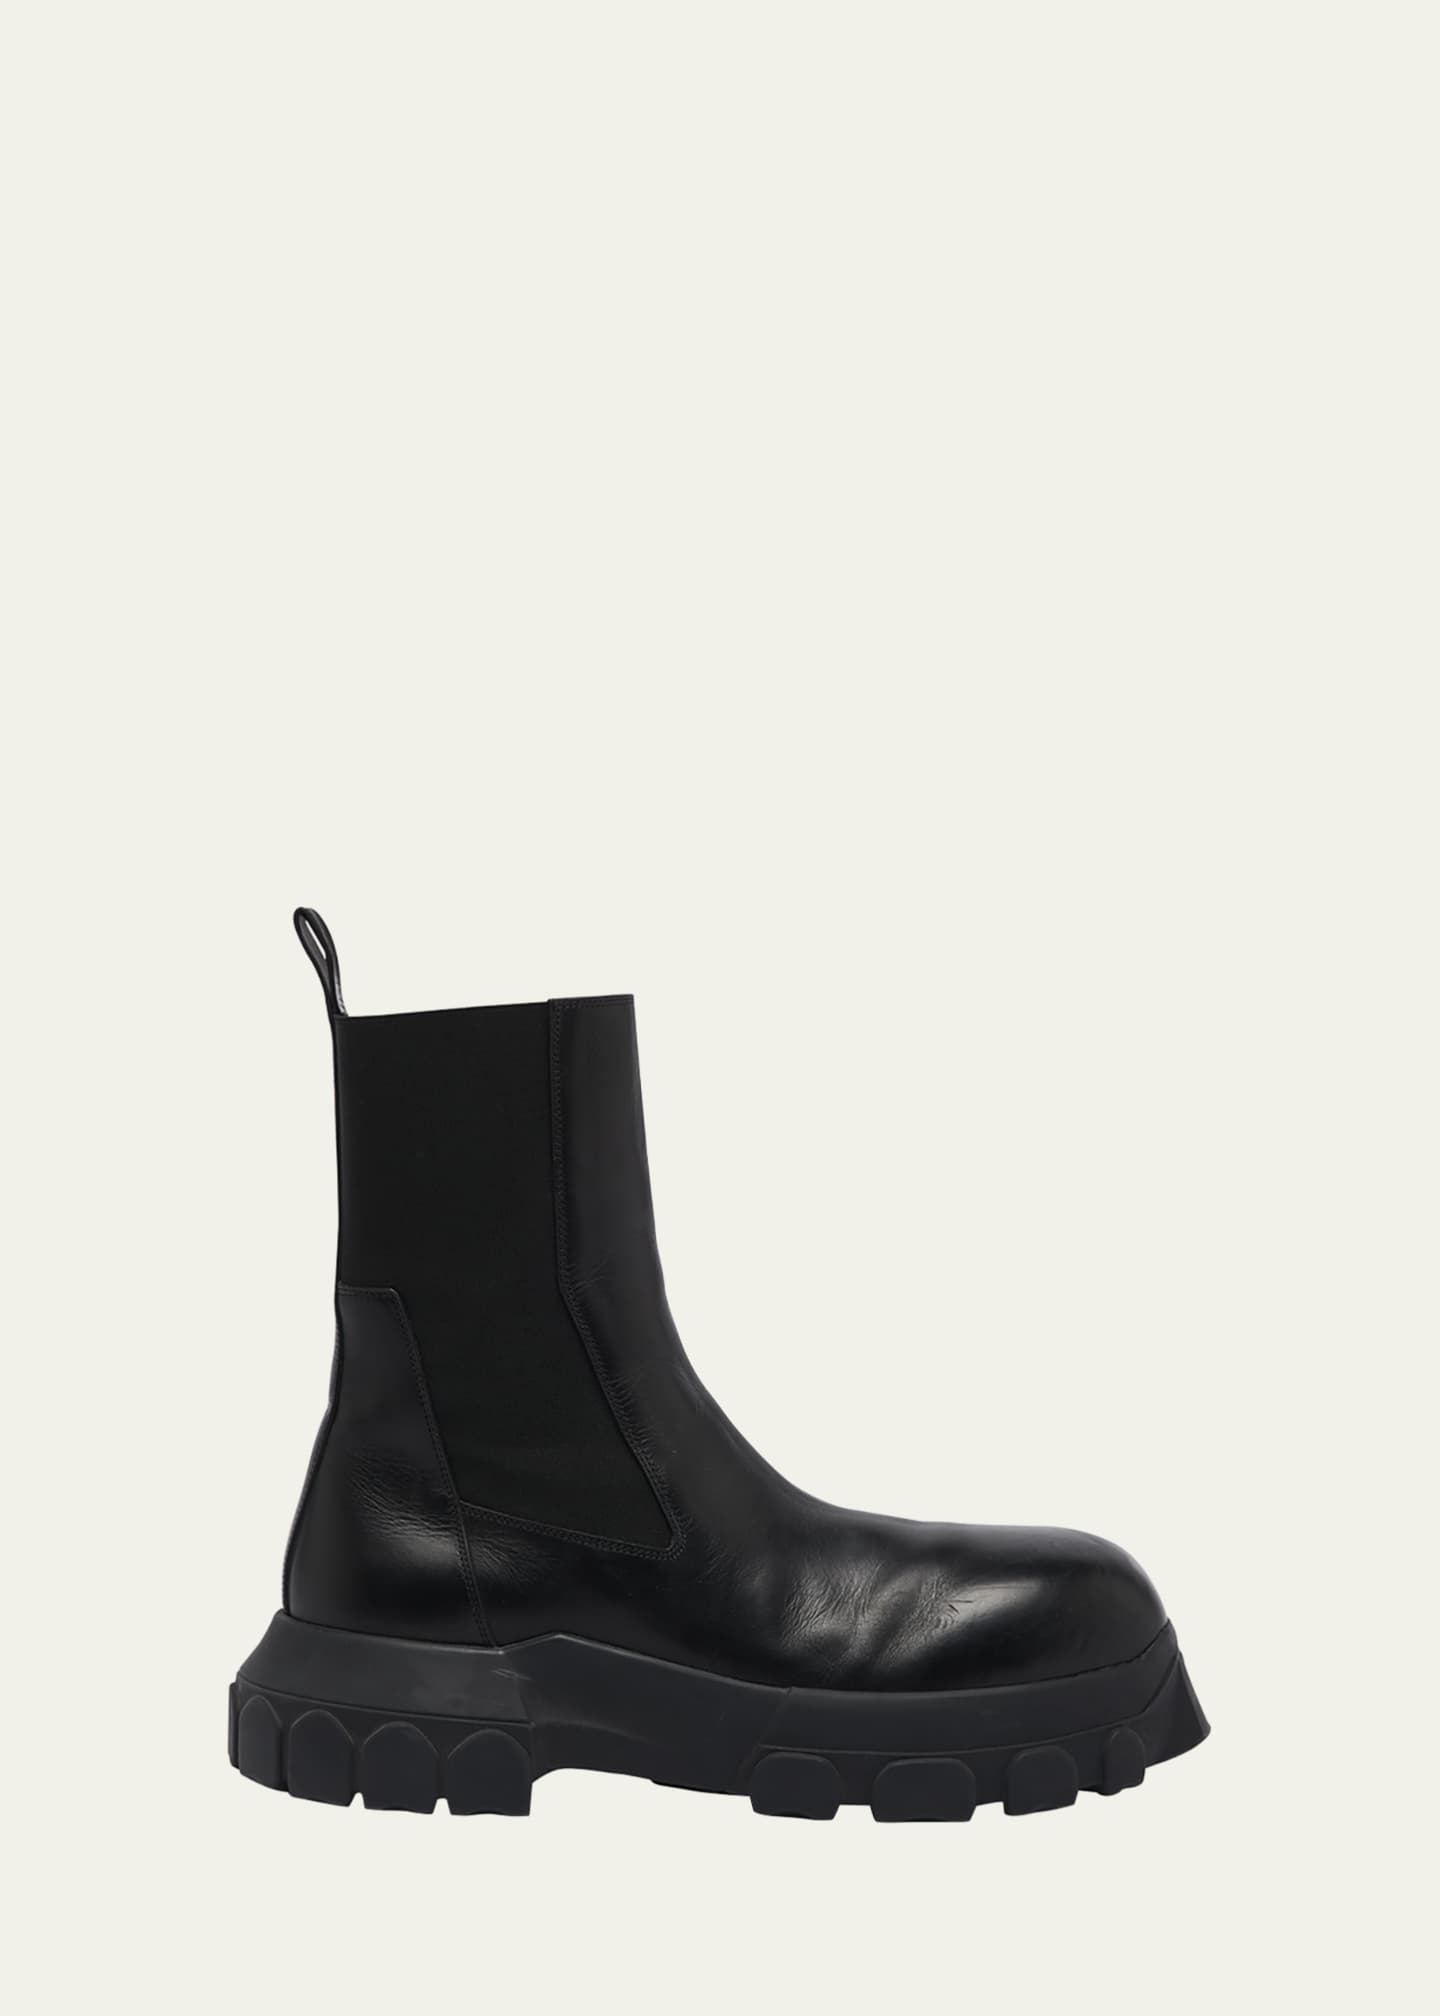 Rick Owens Men's Beatle Bozo Tractor Leather Chelsea Boots